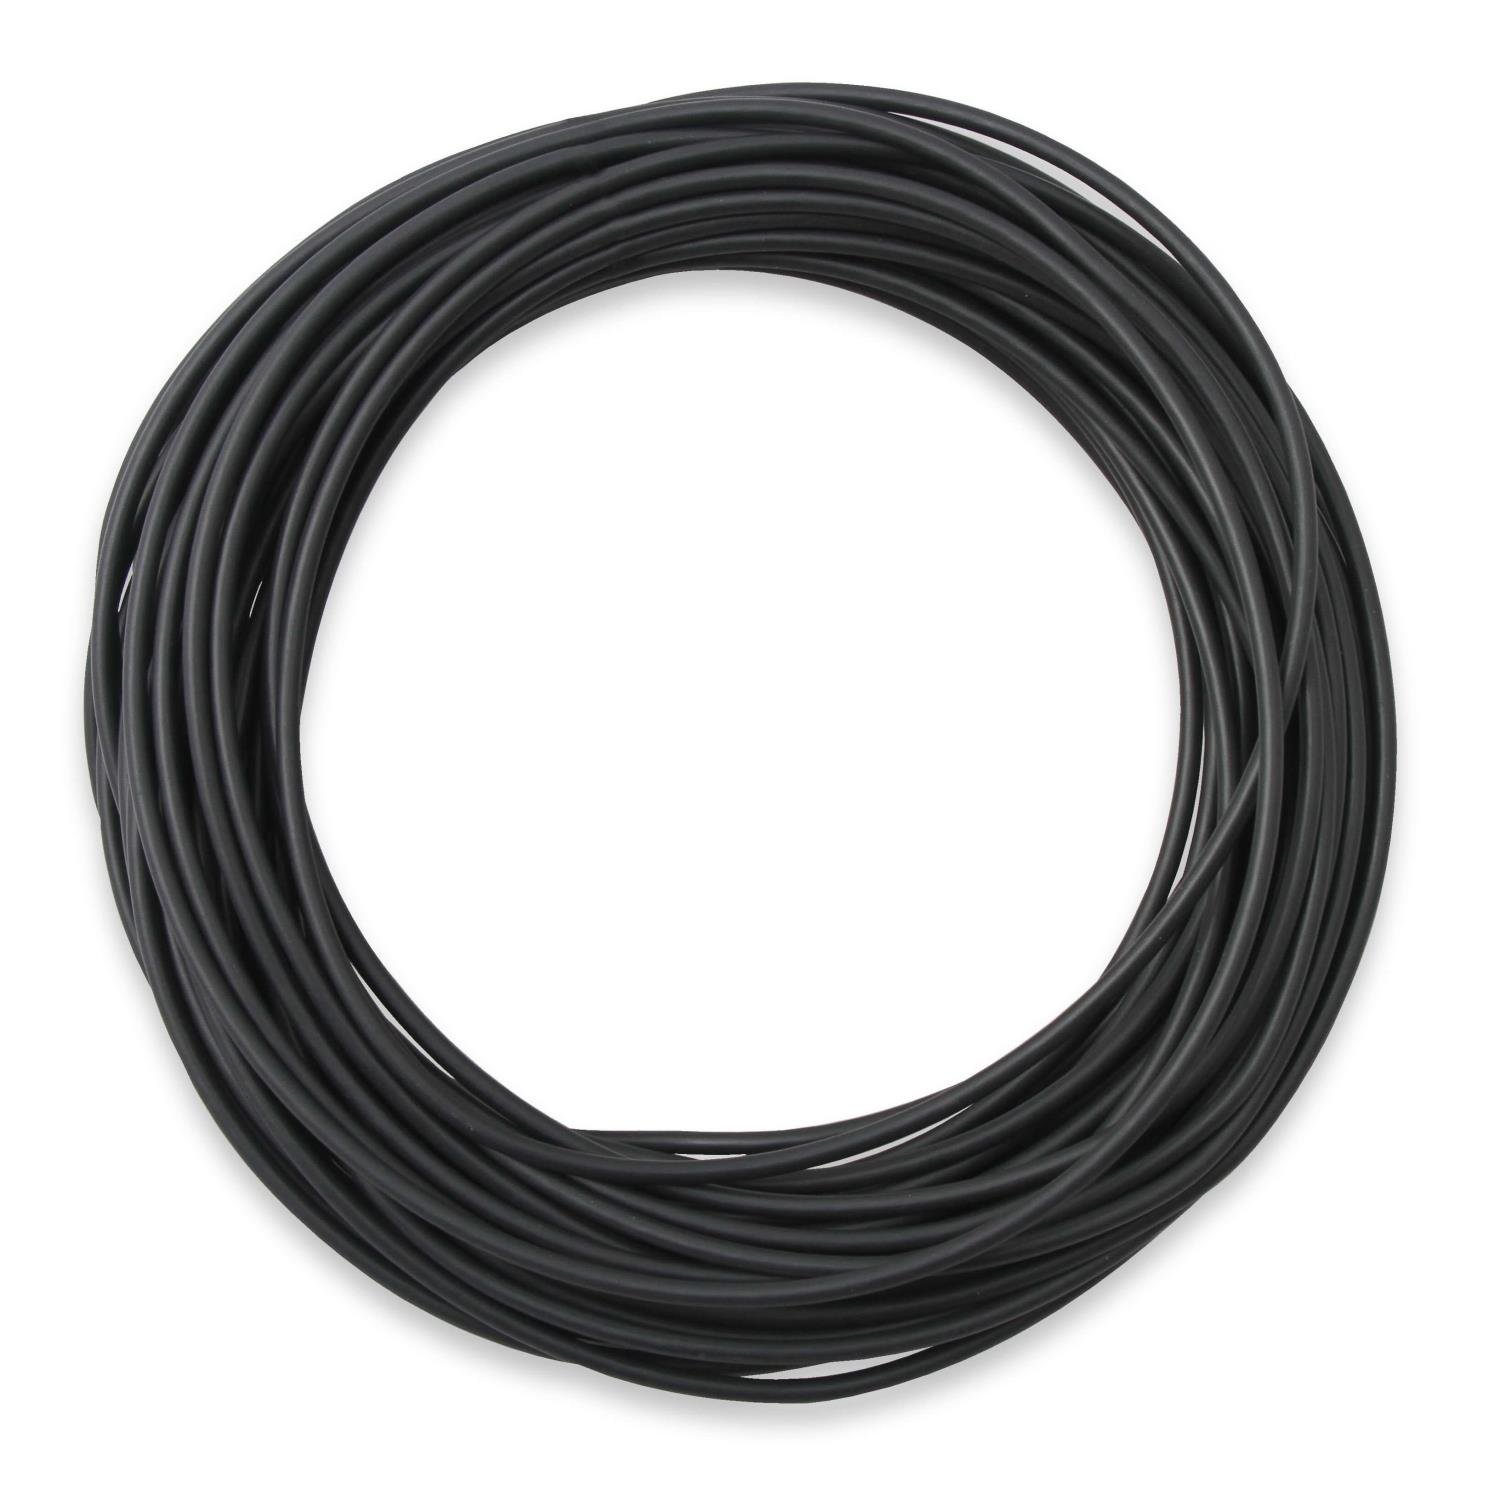 EFI Shielded 3 Conductor Cable in 100 ft. Length